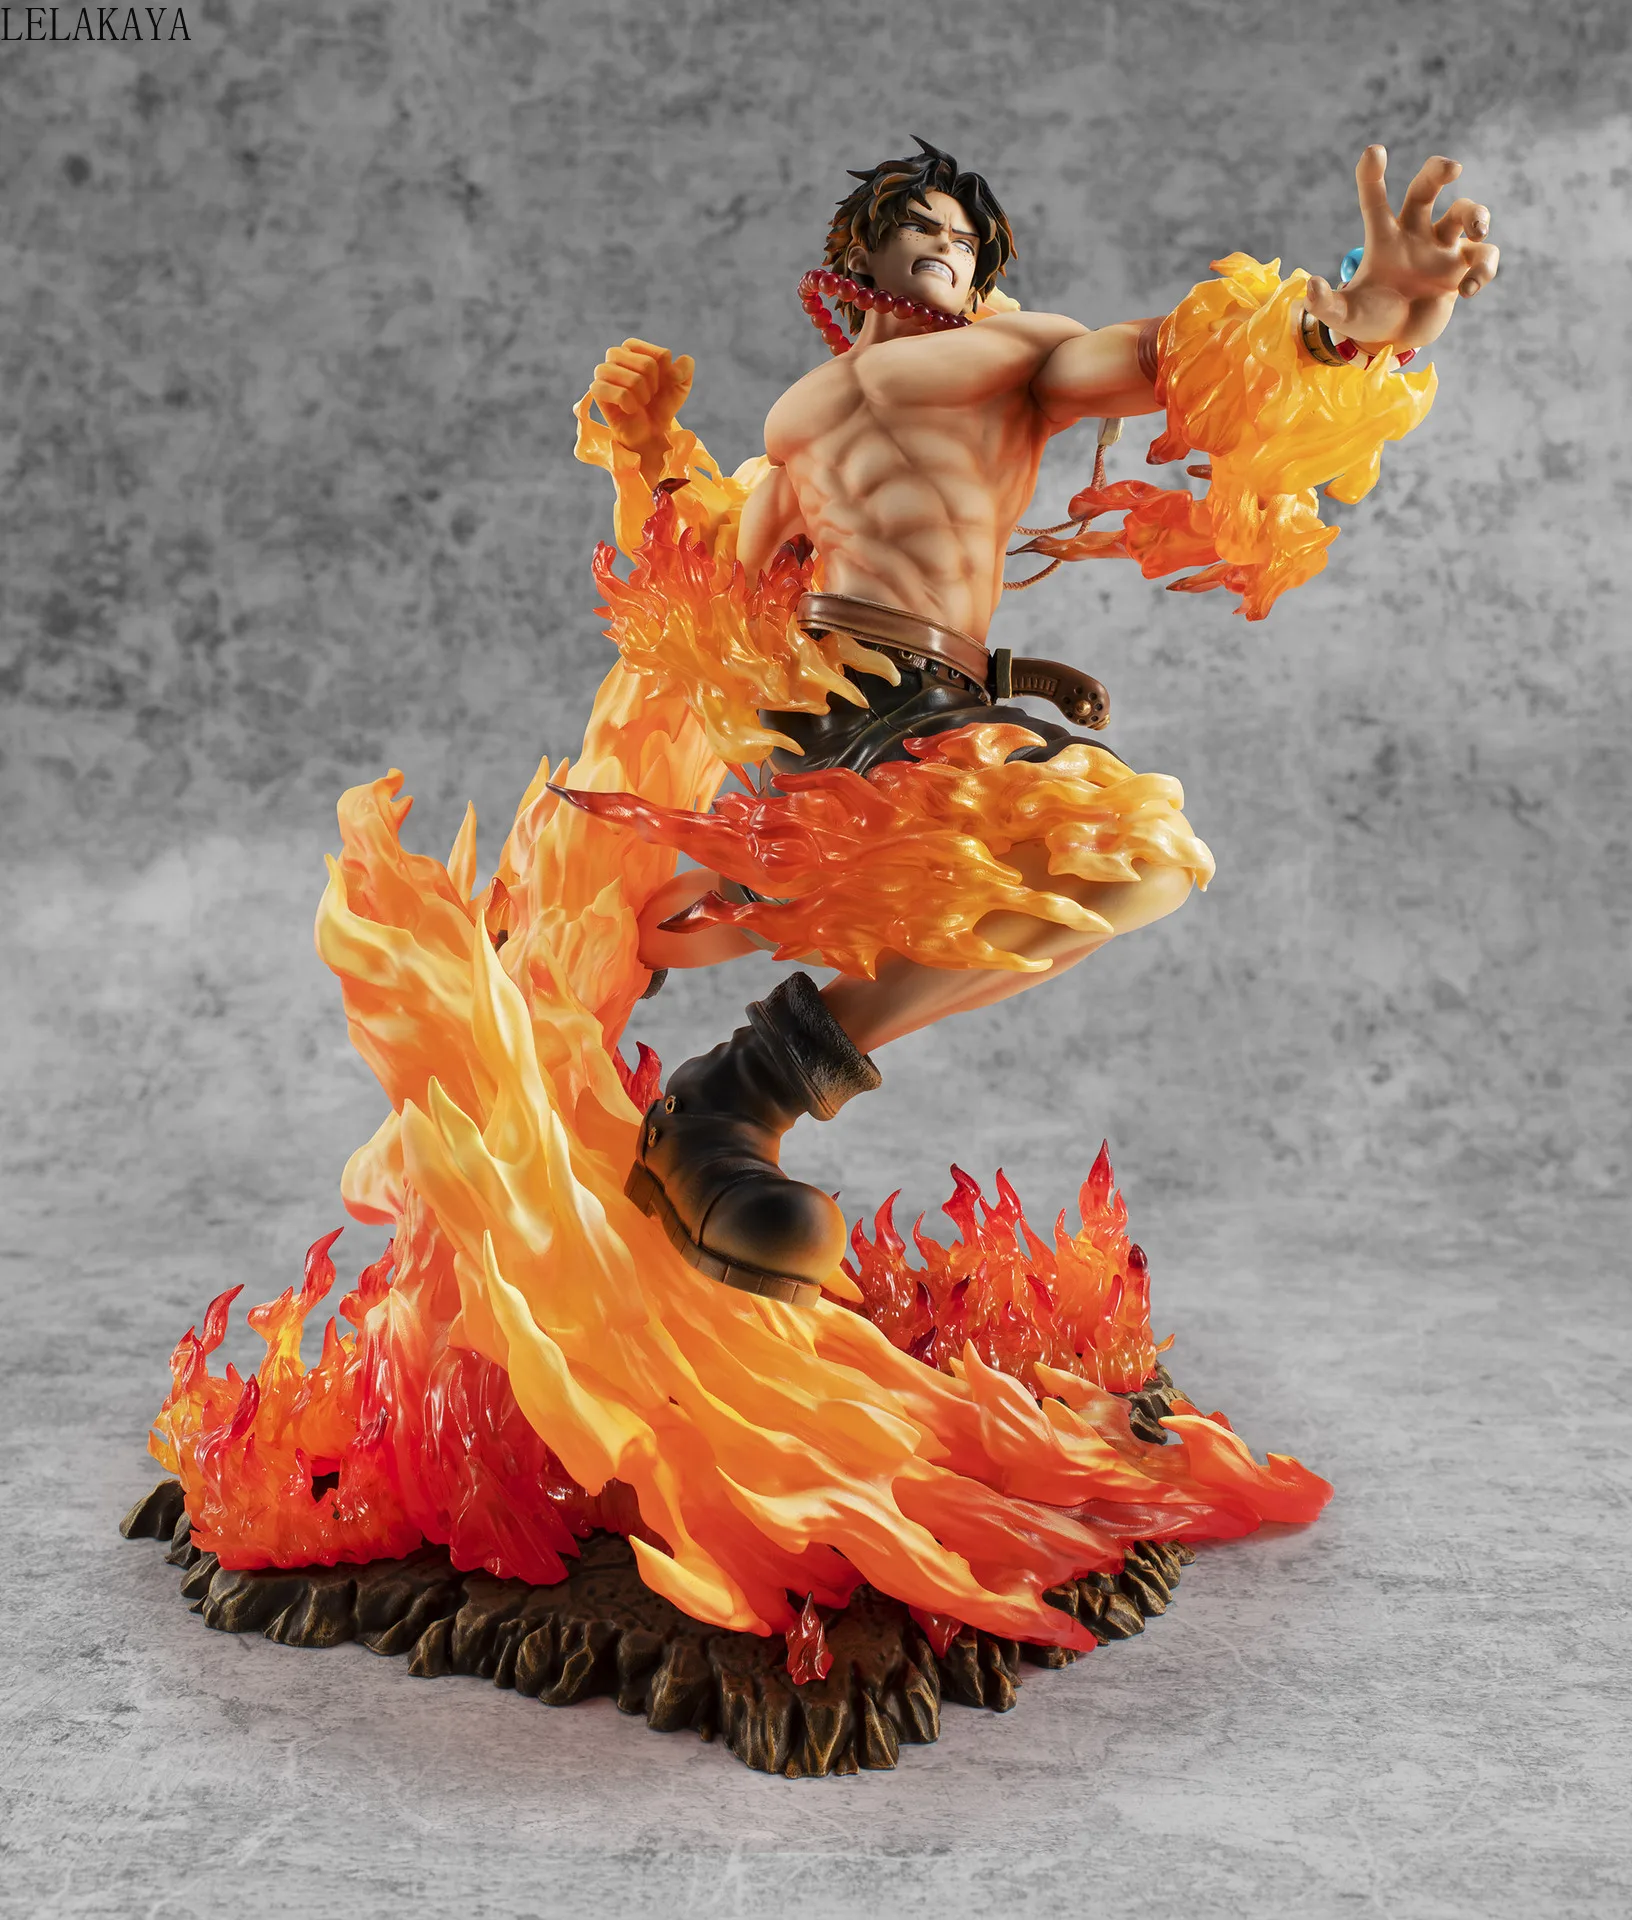 

Anime One Piece Portgas D Ace MAX 15th Anniversary Special Edition Ver. GK Statue PVC Action Figure Collectible Model Toys Gift